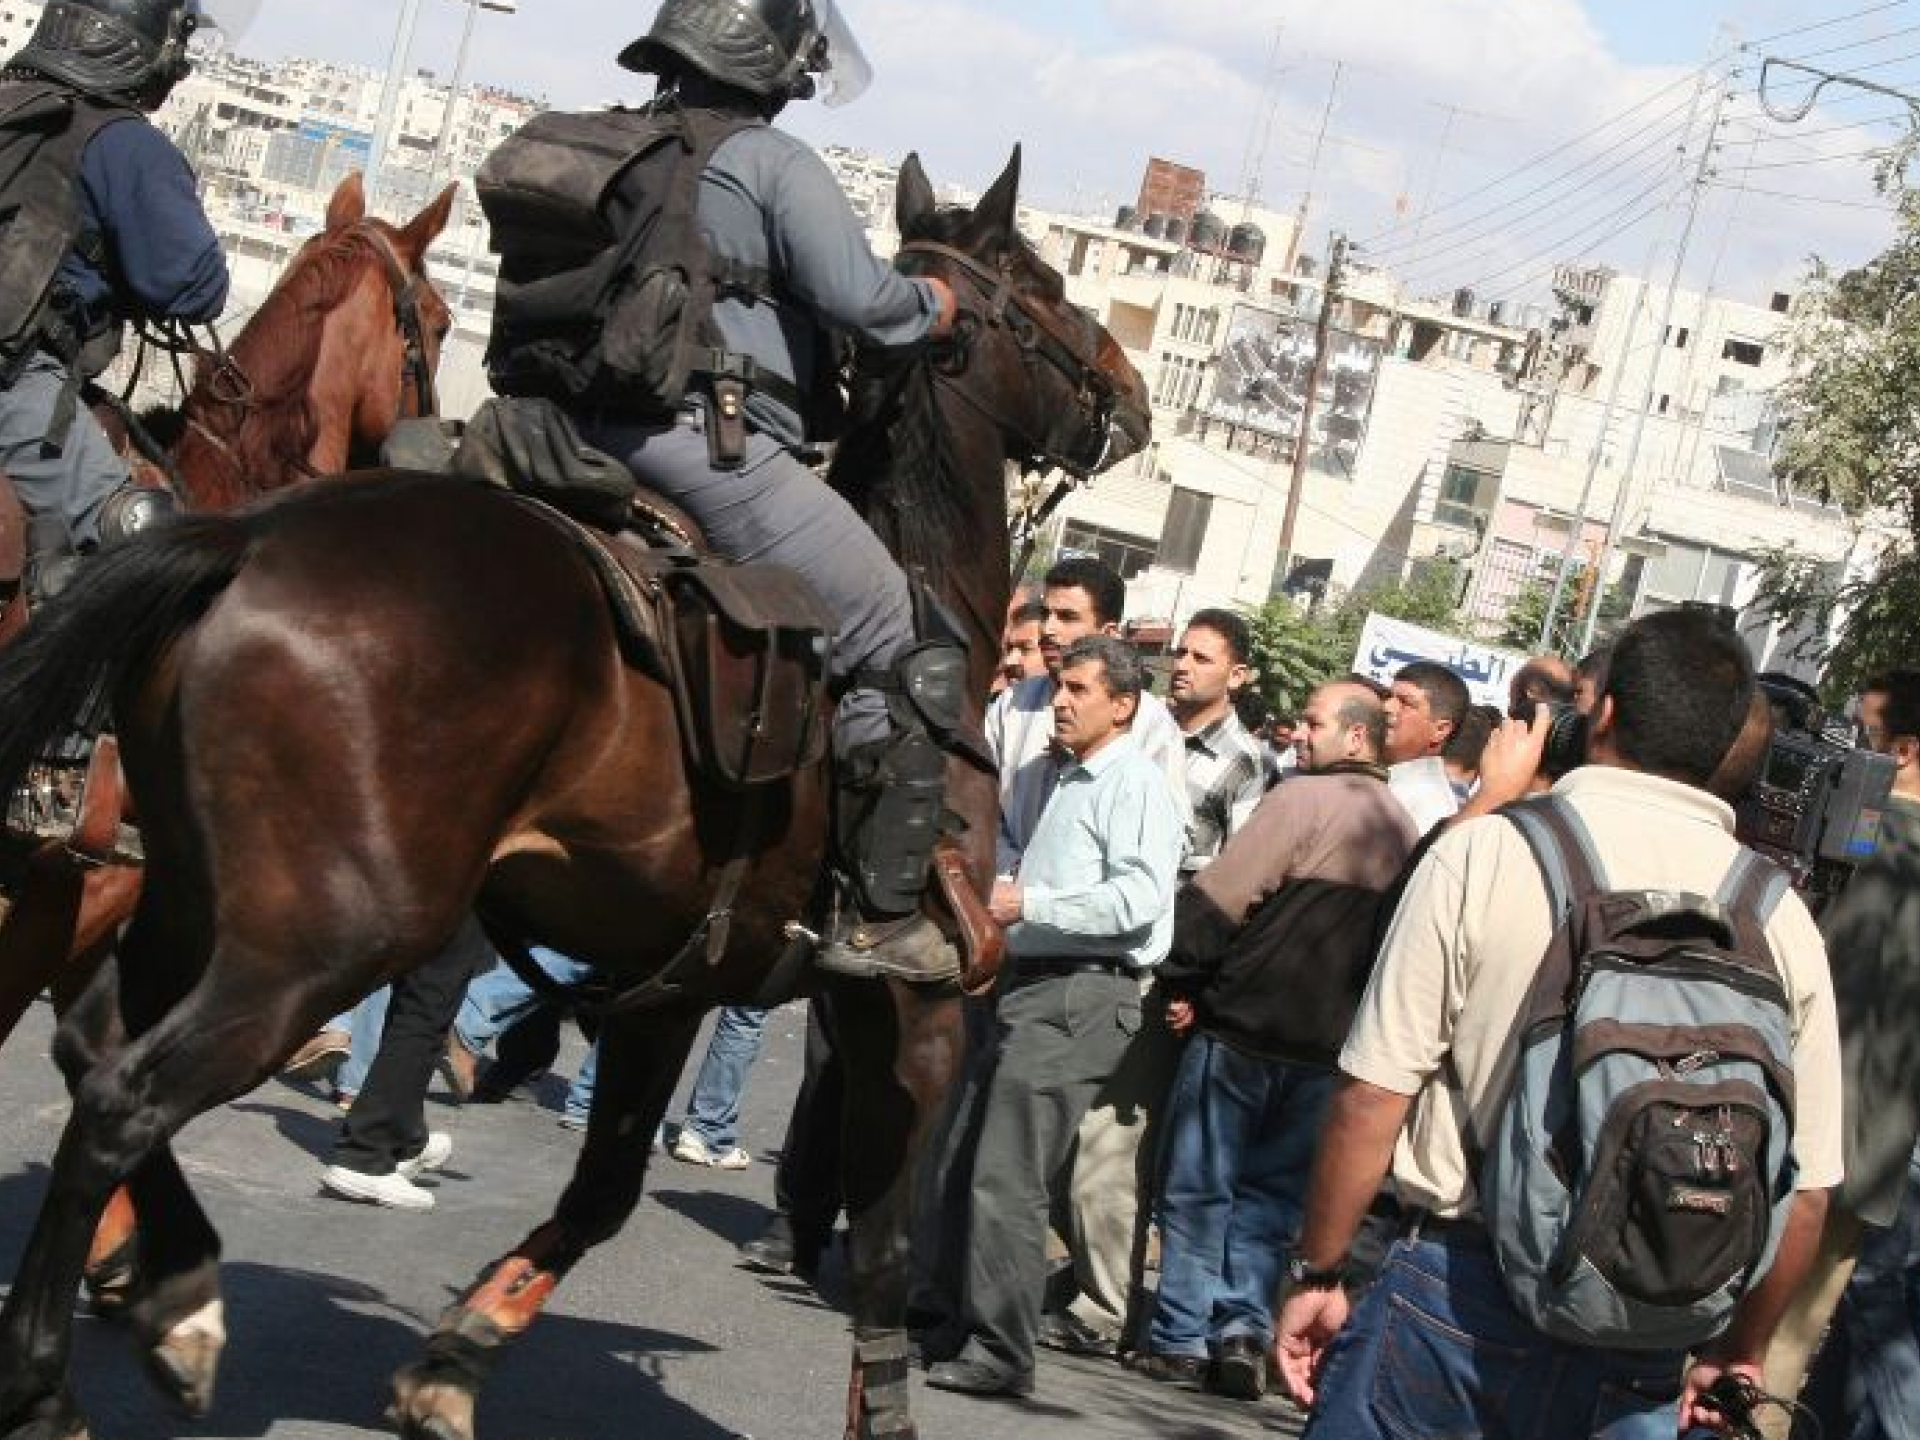 Mounted Policemen Controlling the Passage of Civilians